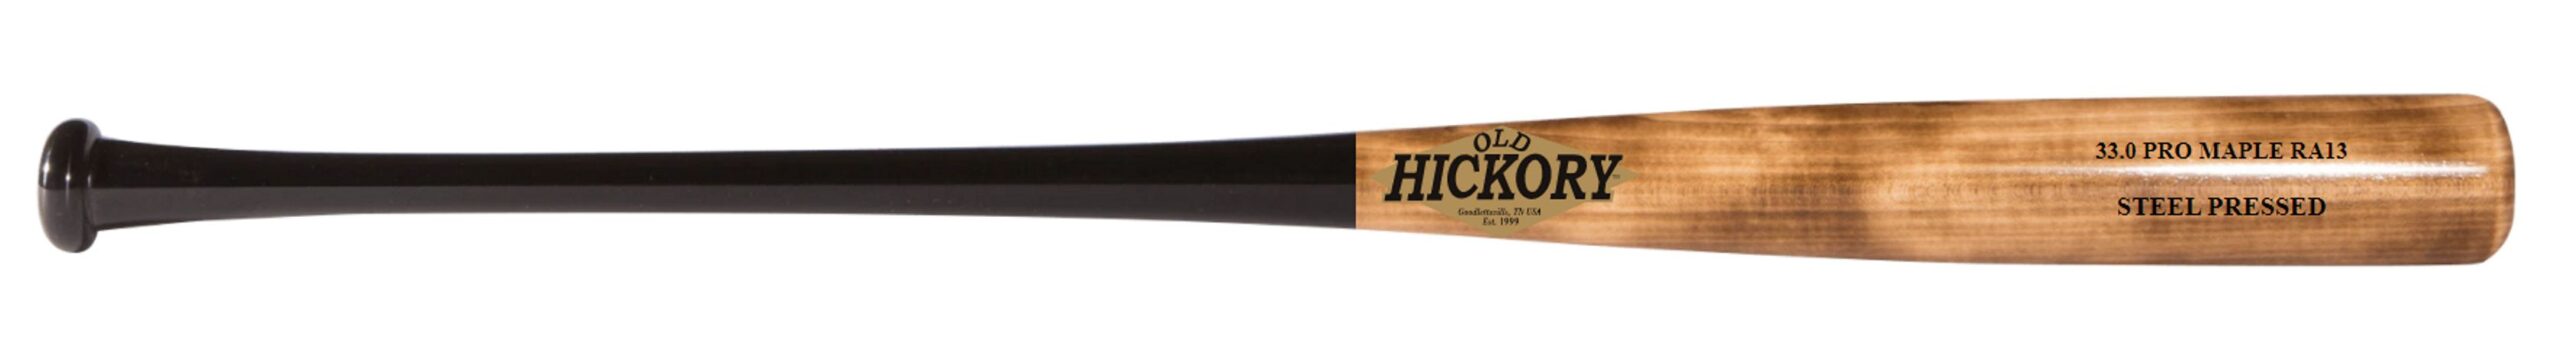 Old Hickory RA13 Pro Maple Steel Pressed